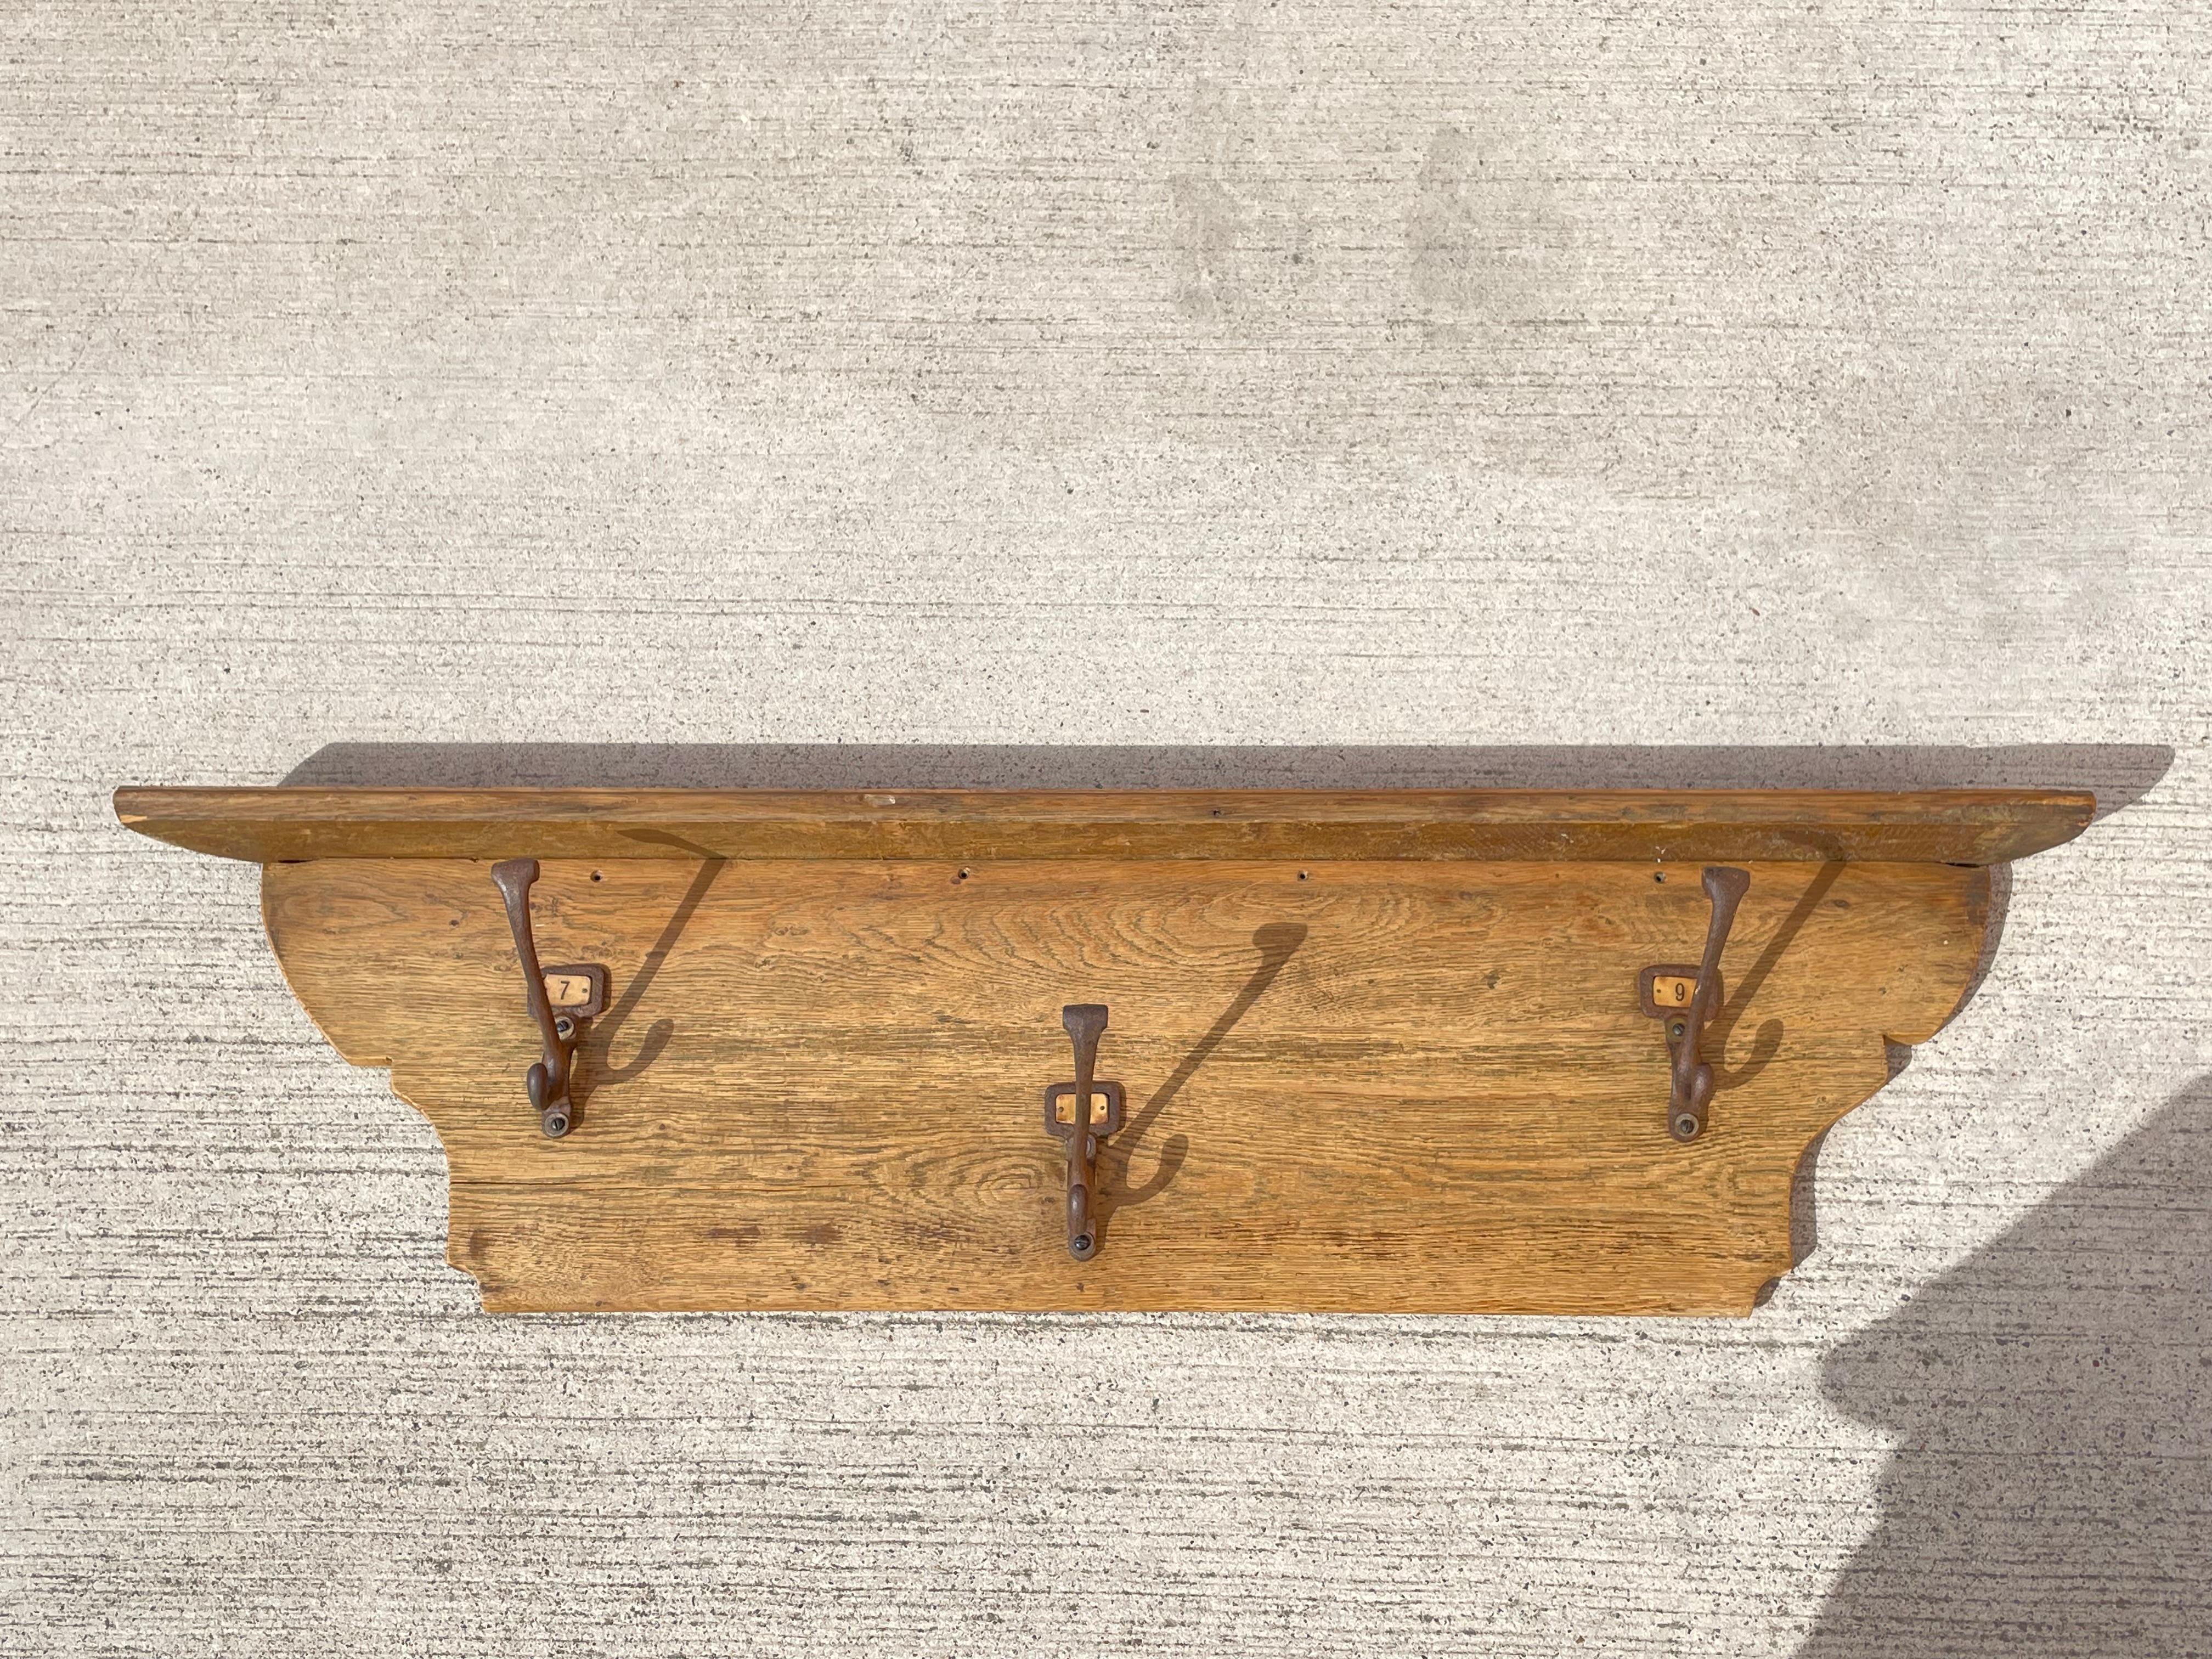 A beautiful old English industrial coat hook. This large coat rack is made in solid oak with three large sized double hooks which are made in iron. Each hook has the original paper number about d the hook. This piece is full of character and patina.